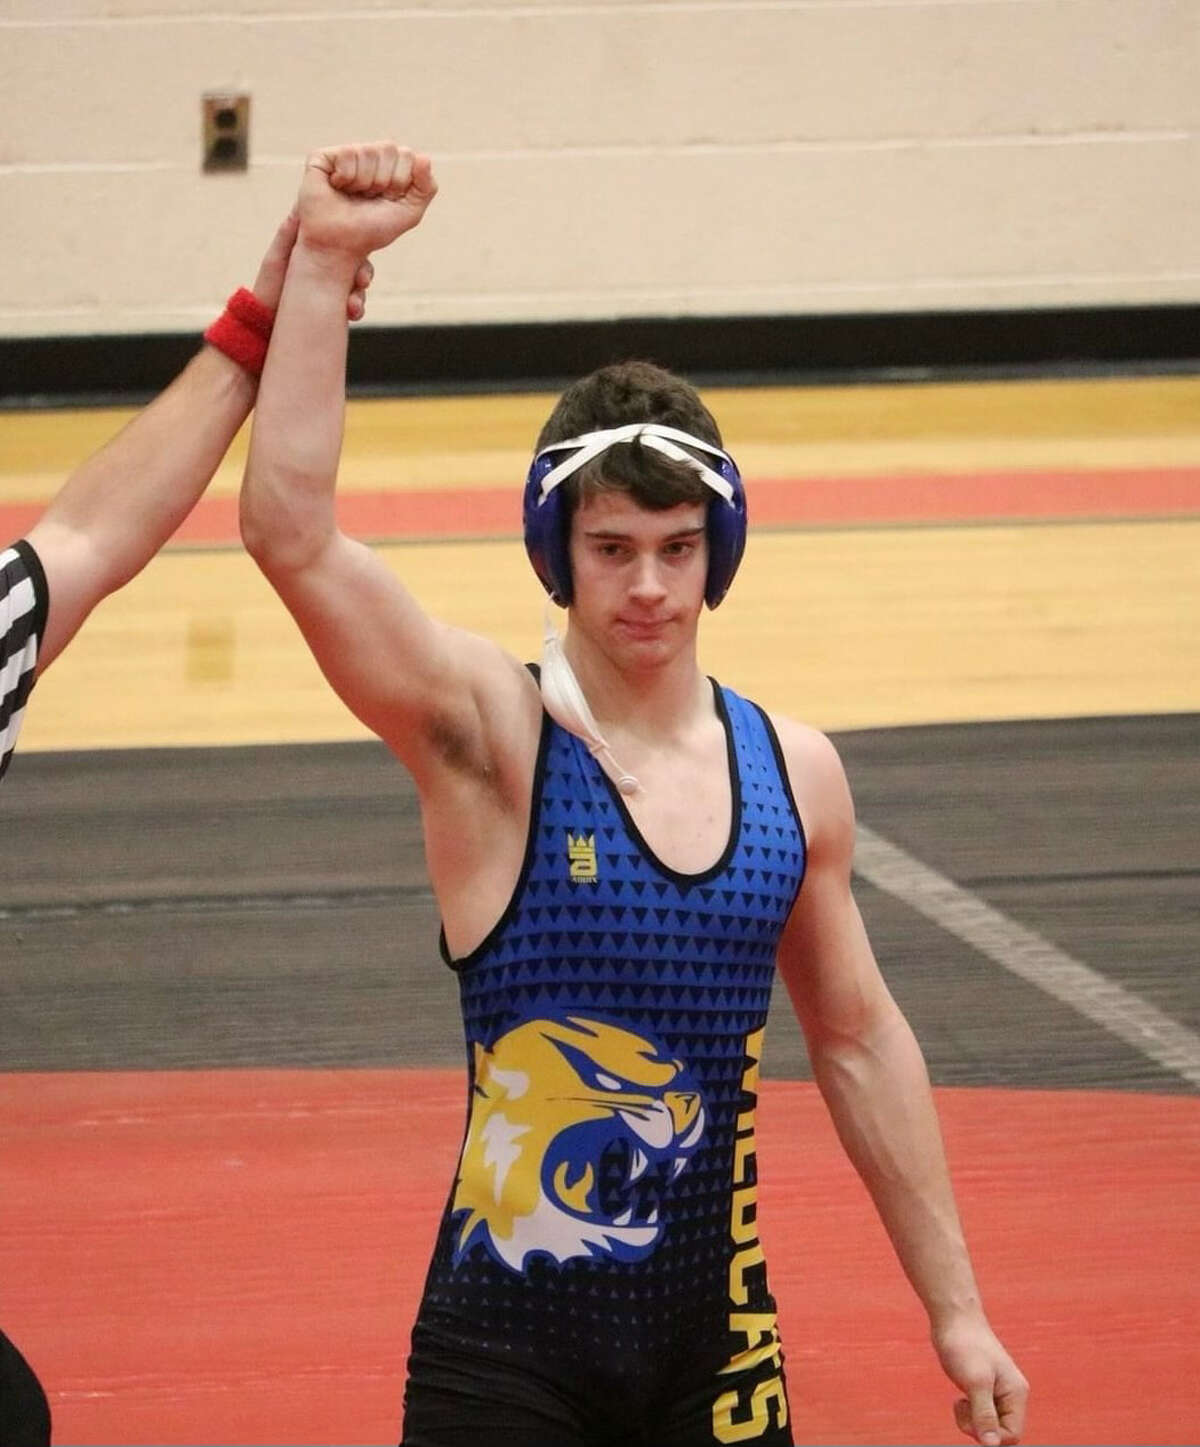 Evart's Riley Ransom will be among the top local wrestlers at Thursday's "rumble" team tournament in Reed City.